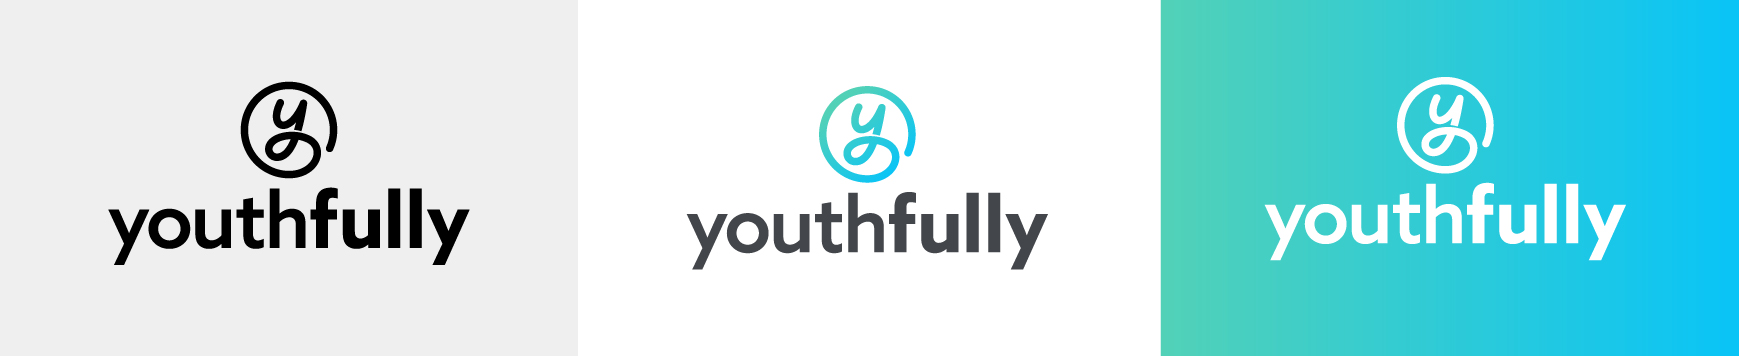 Vertical logo variations of the Youthfully logo.